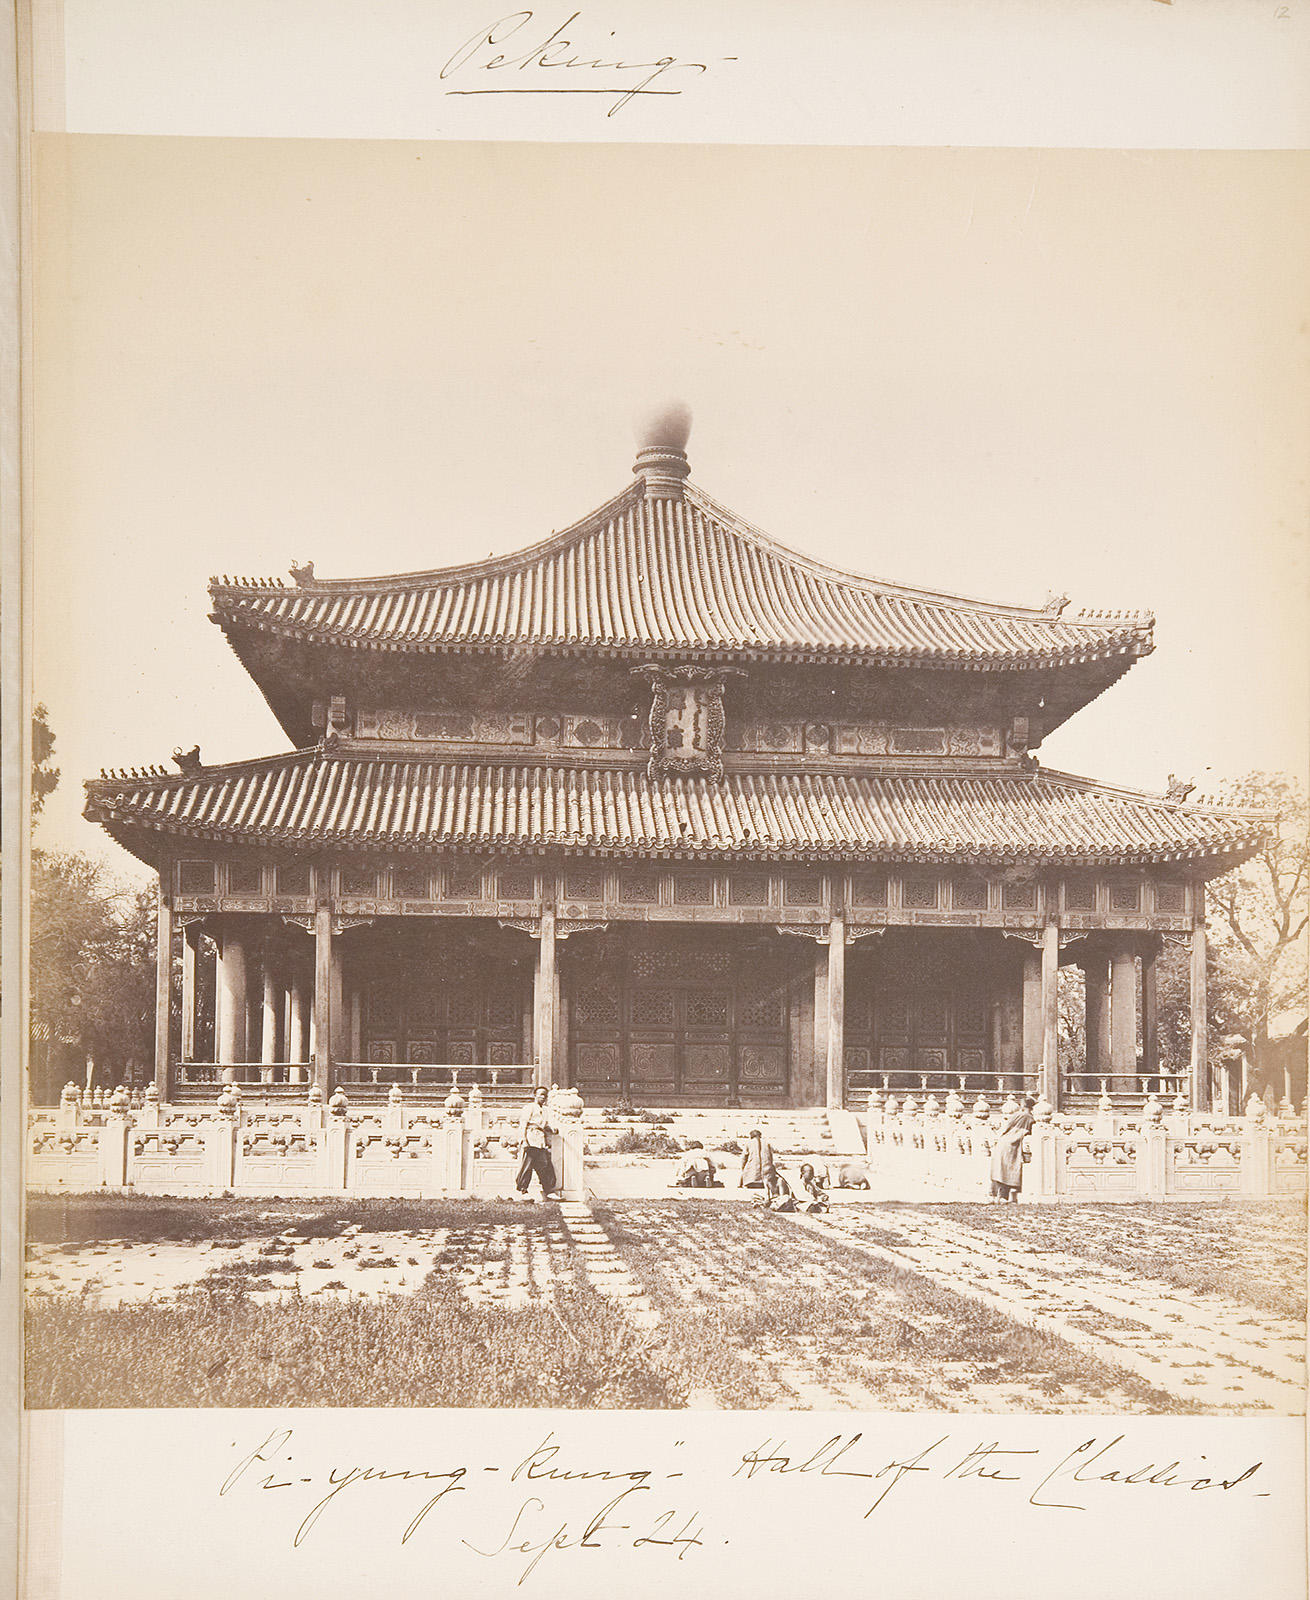 Isabella Stewart Gardner's Travel Album: China, 1883 showing the Imperial Academy [Hall of Classics] in Beijing